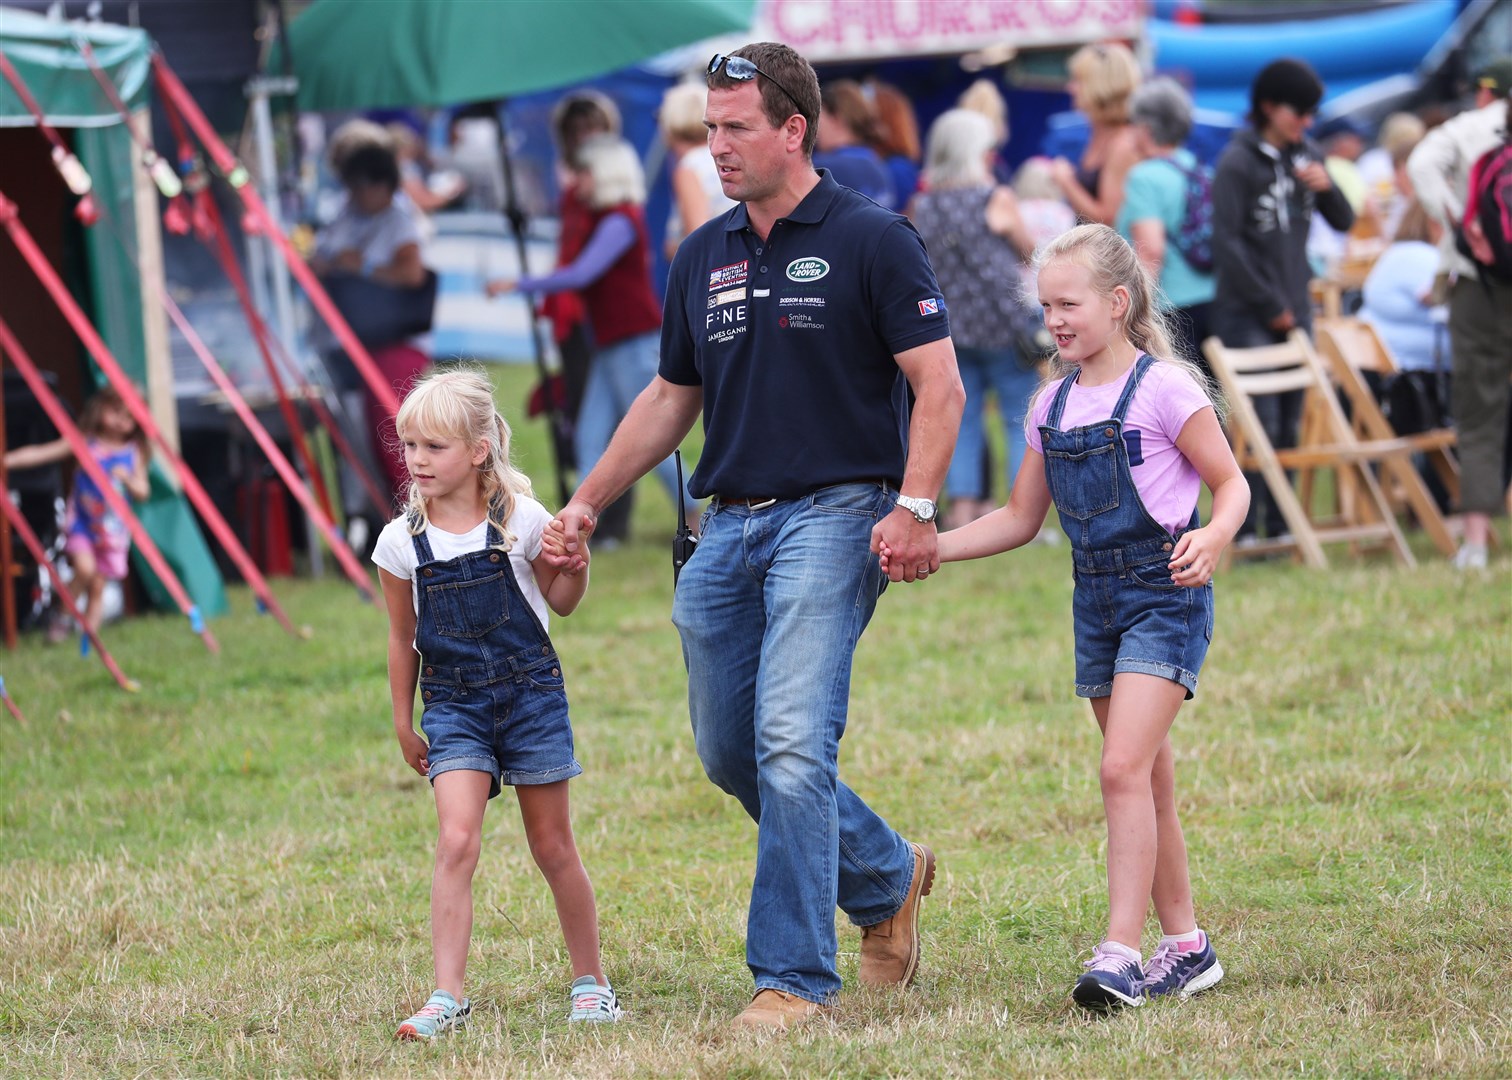 Peter Phillips with his daughters, Isla (left) and Savannah, during the Festival of British Eventing in 2019 (Steve Parsons/PA)